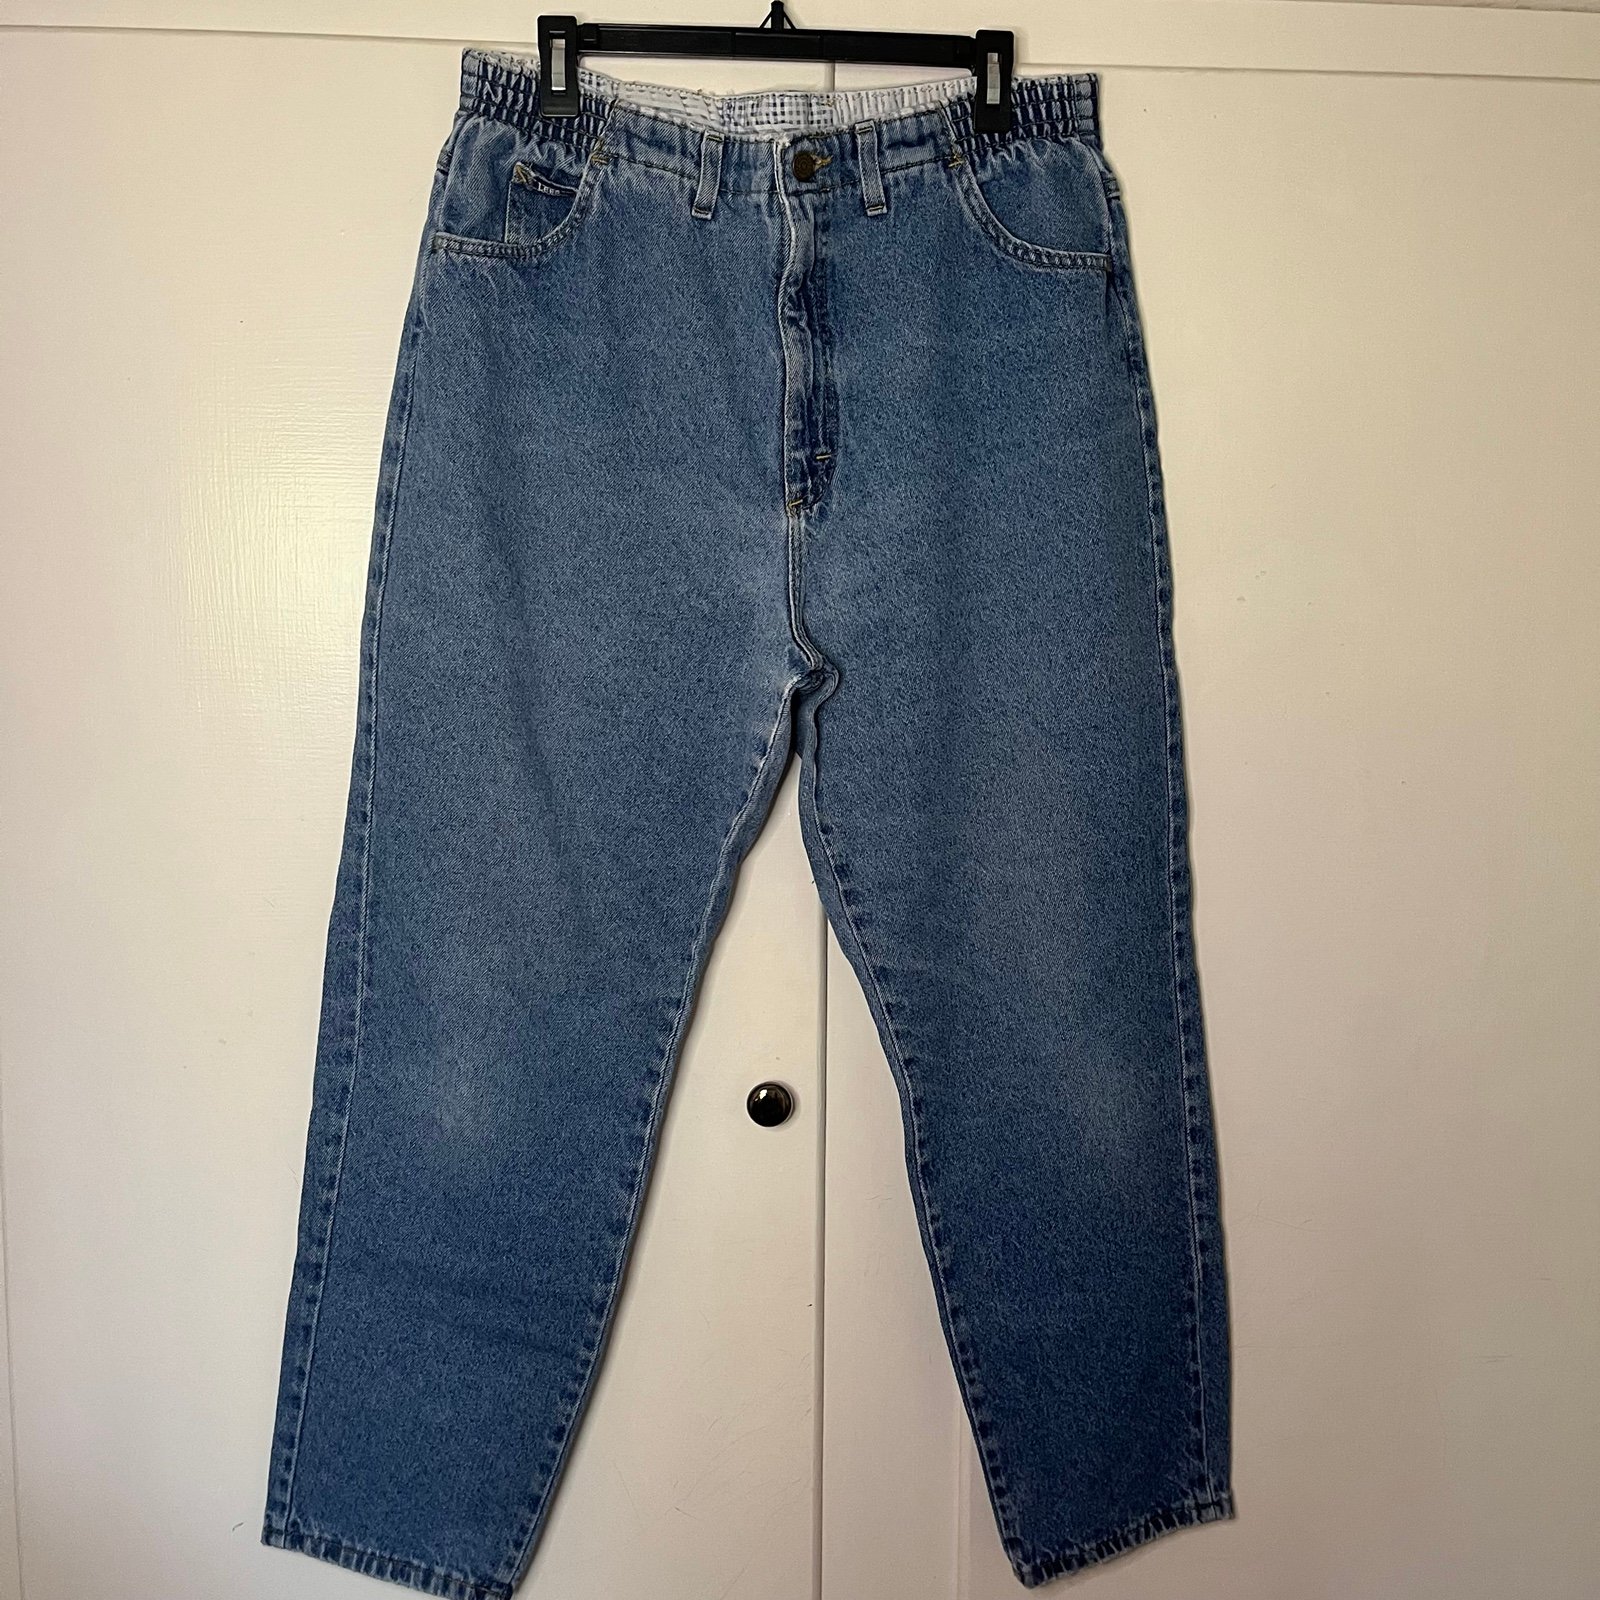 Exclusive Vintage 90s Lee Relaxed Fit Mom Jeans Medium Wash kg3IWCtgR Online Exclusive